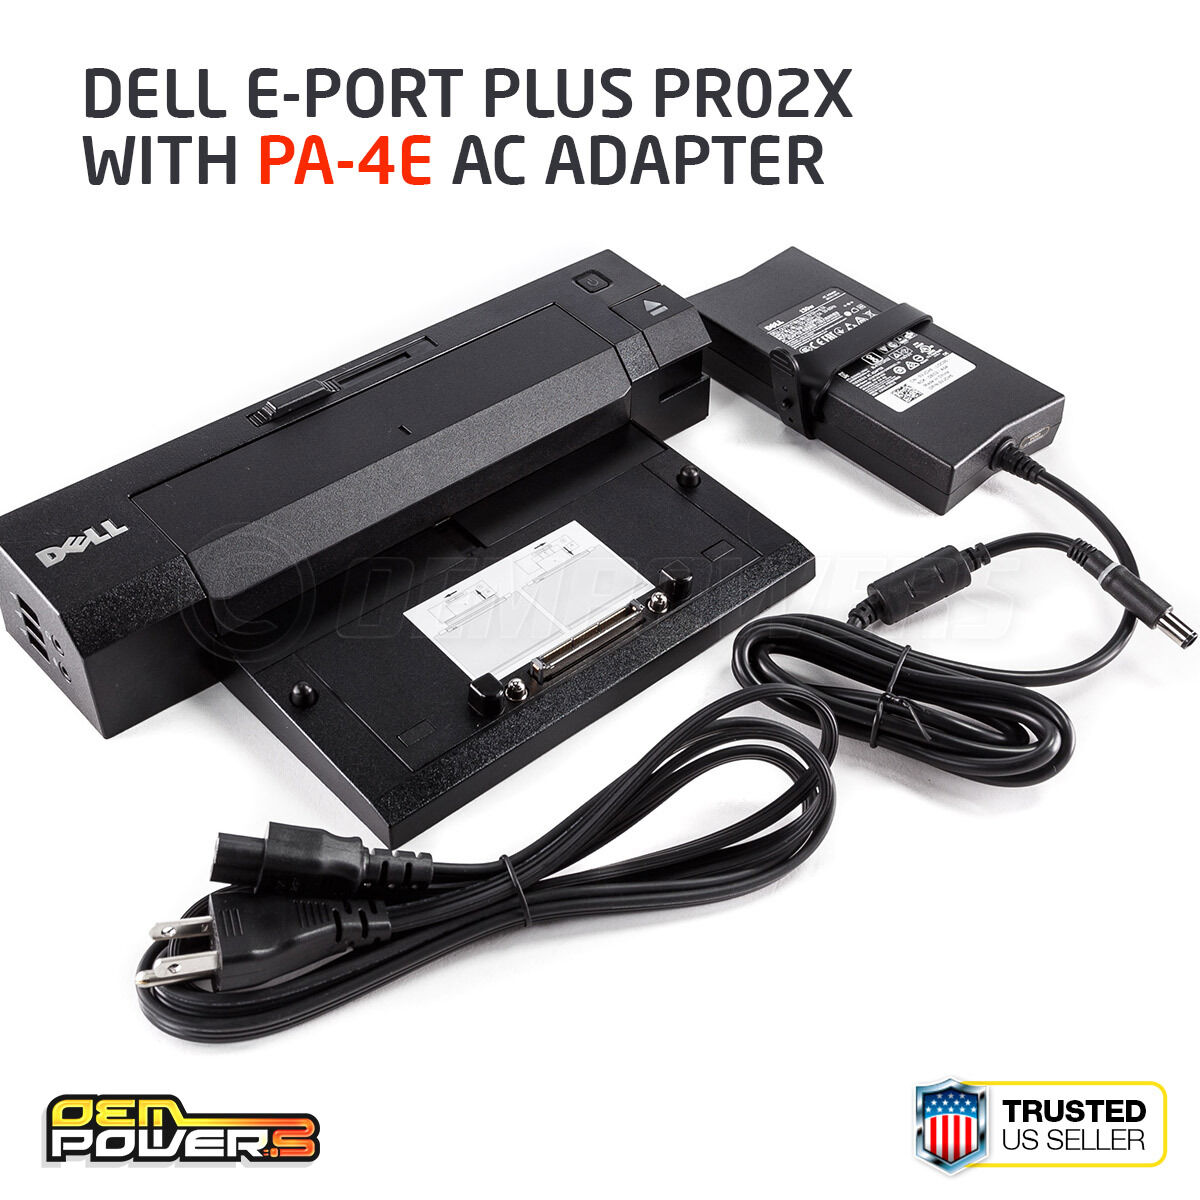 Dell C/DockII PDX Laptop Docking Station for Latitude C Series P